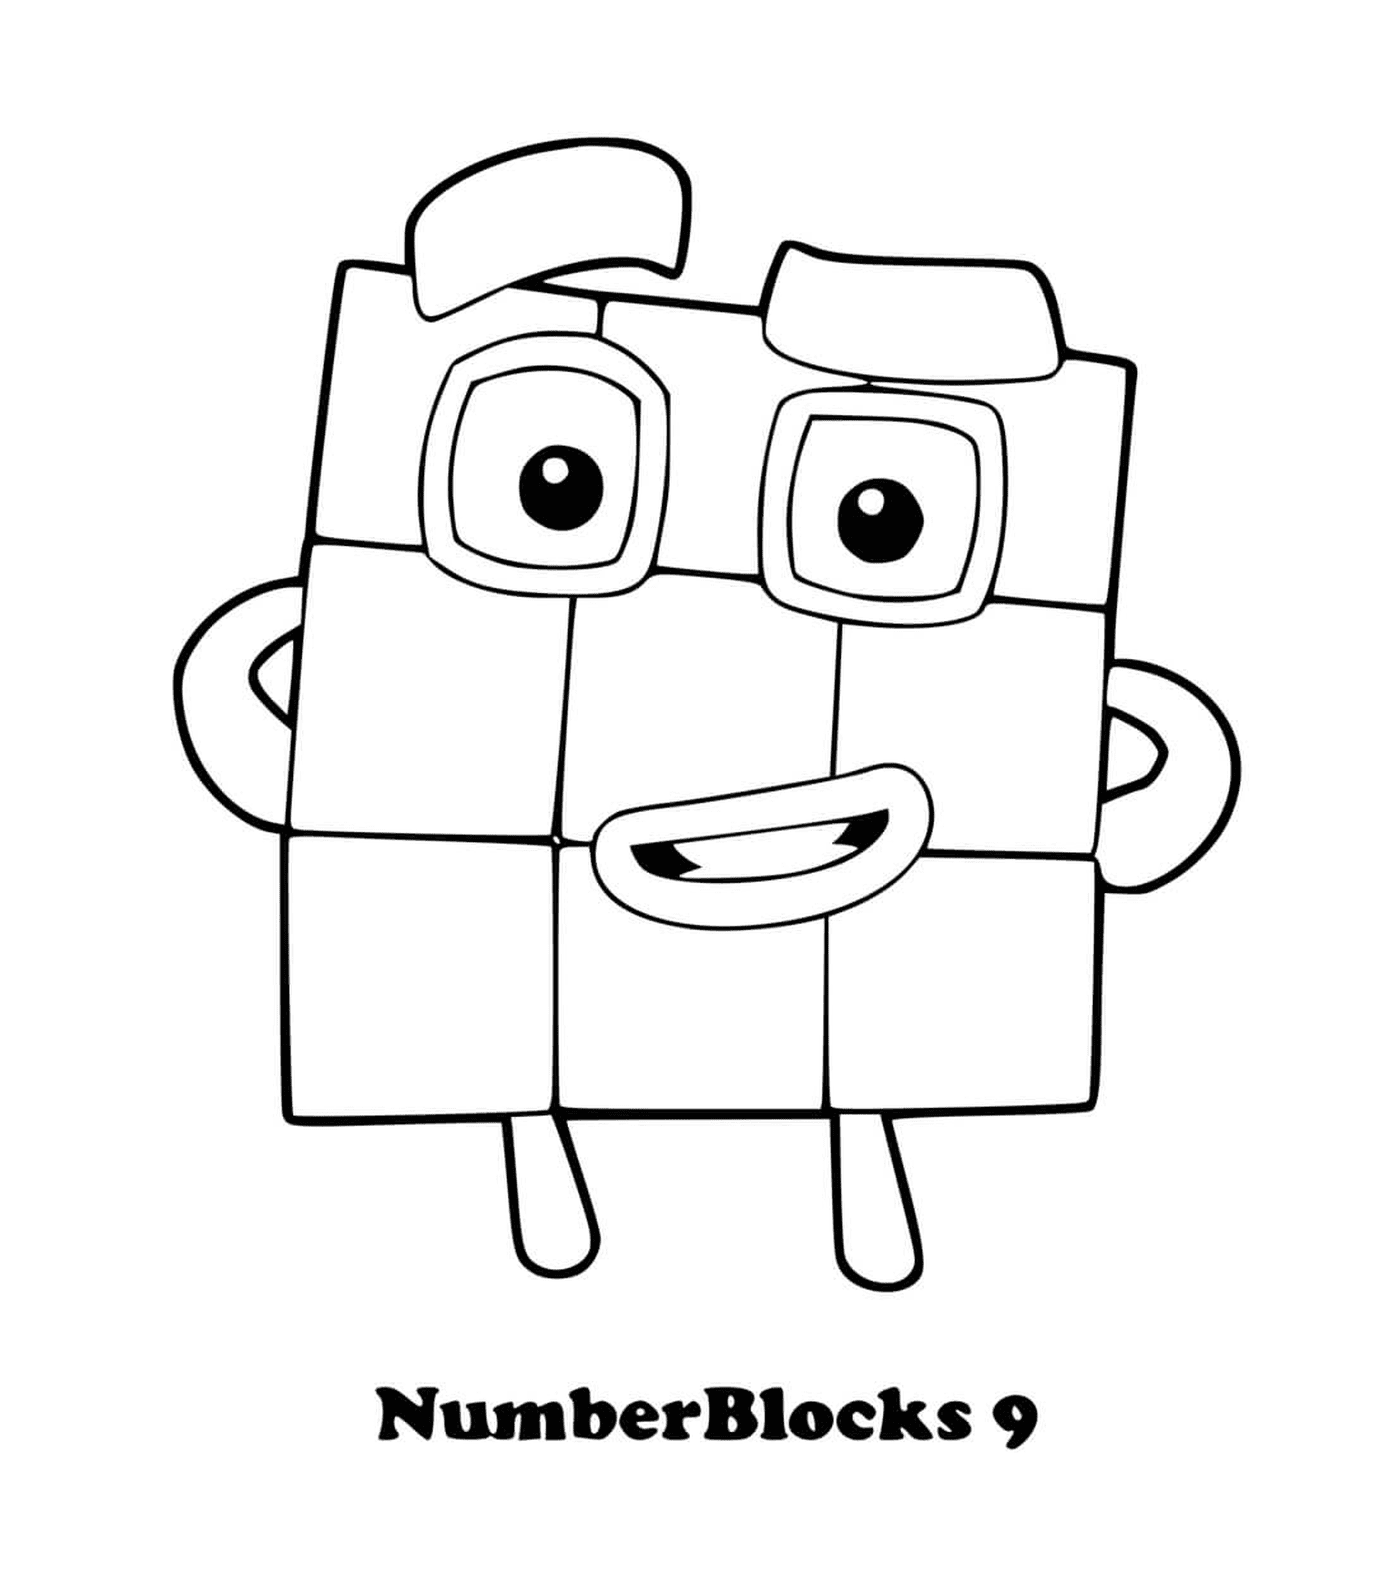  Numberblocks number 9, a square with eyes 